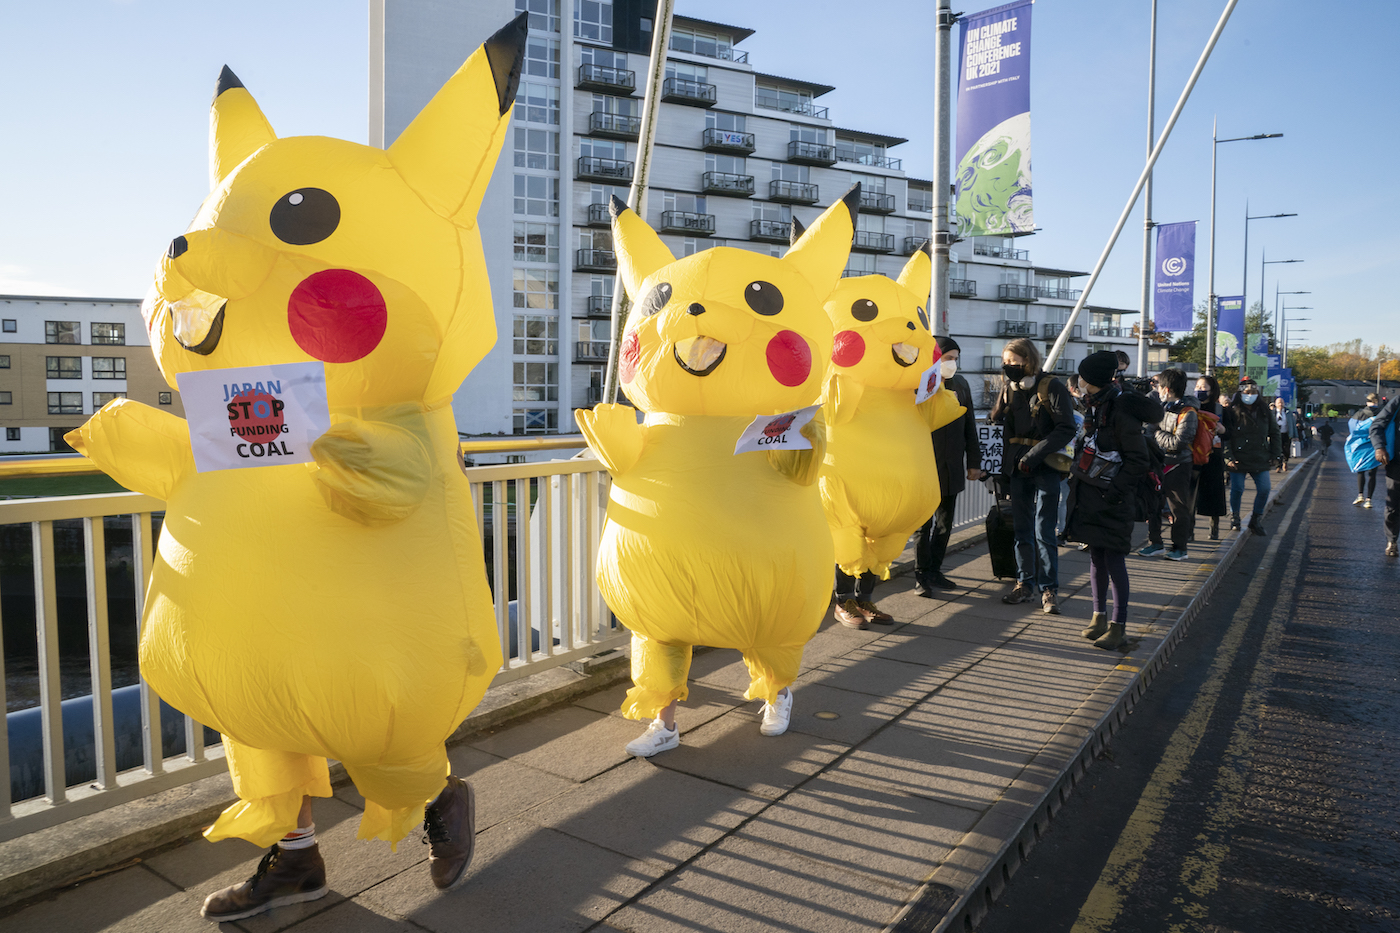 Protesters in inflatable pikachu costumes march holding signs that say "Japan, stop funding coal"